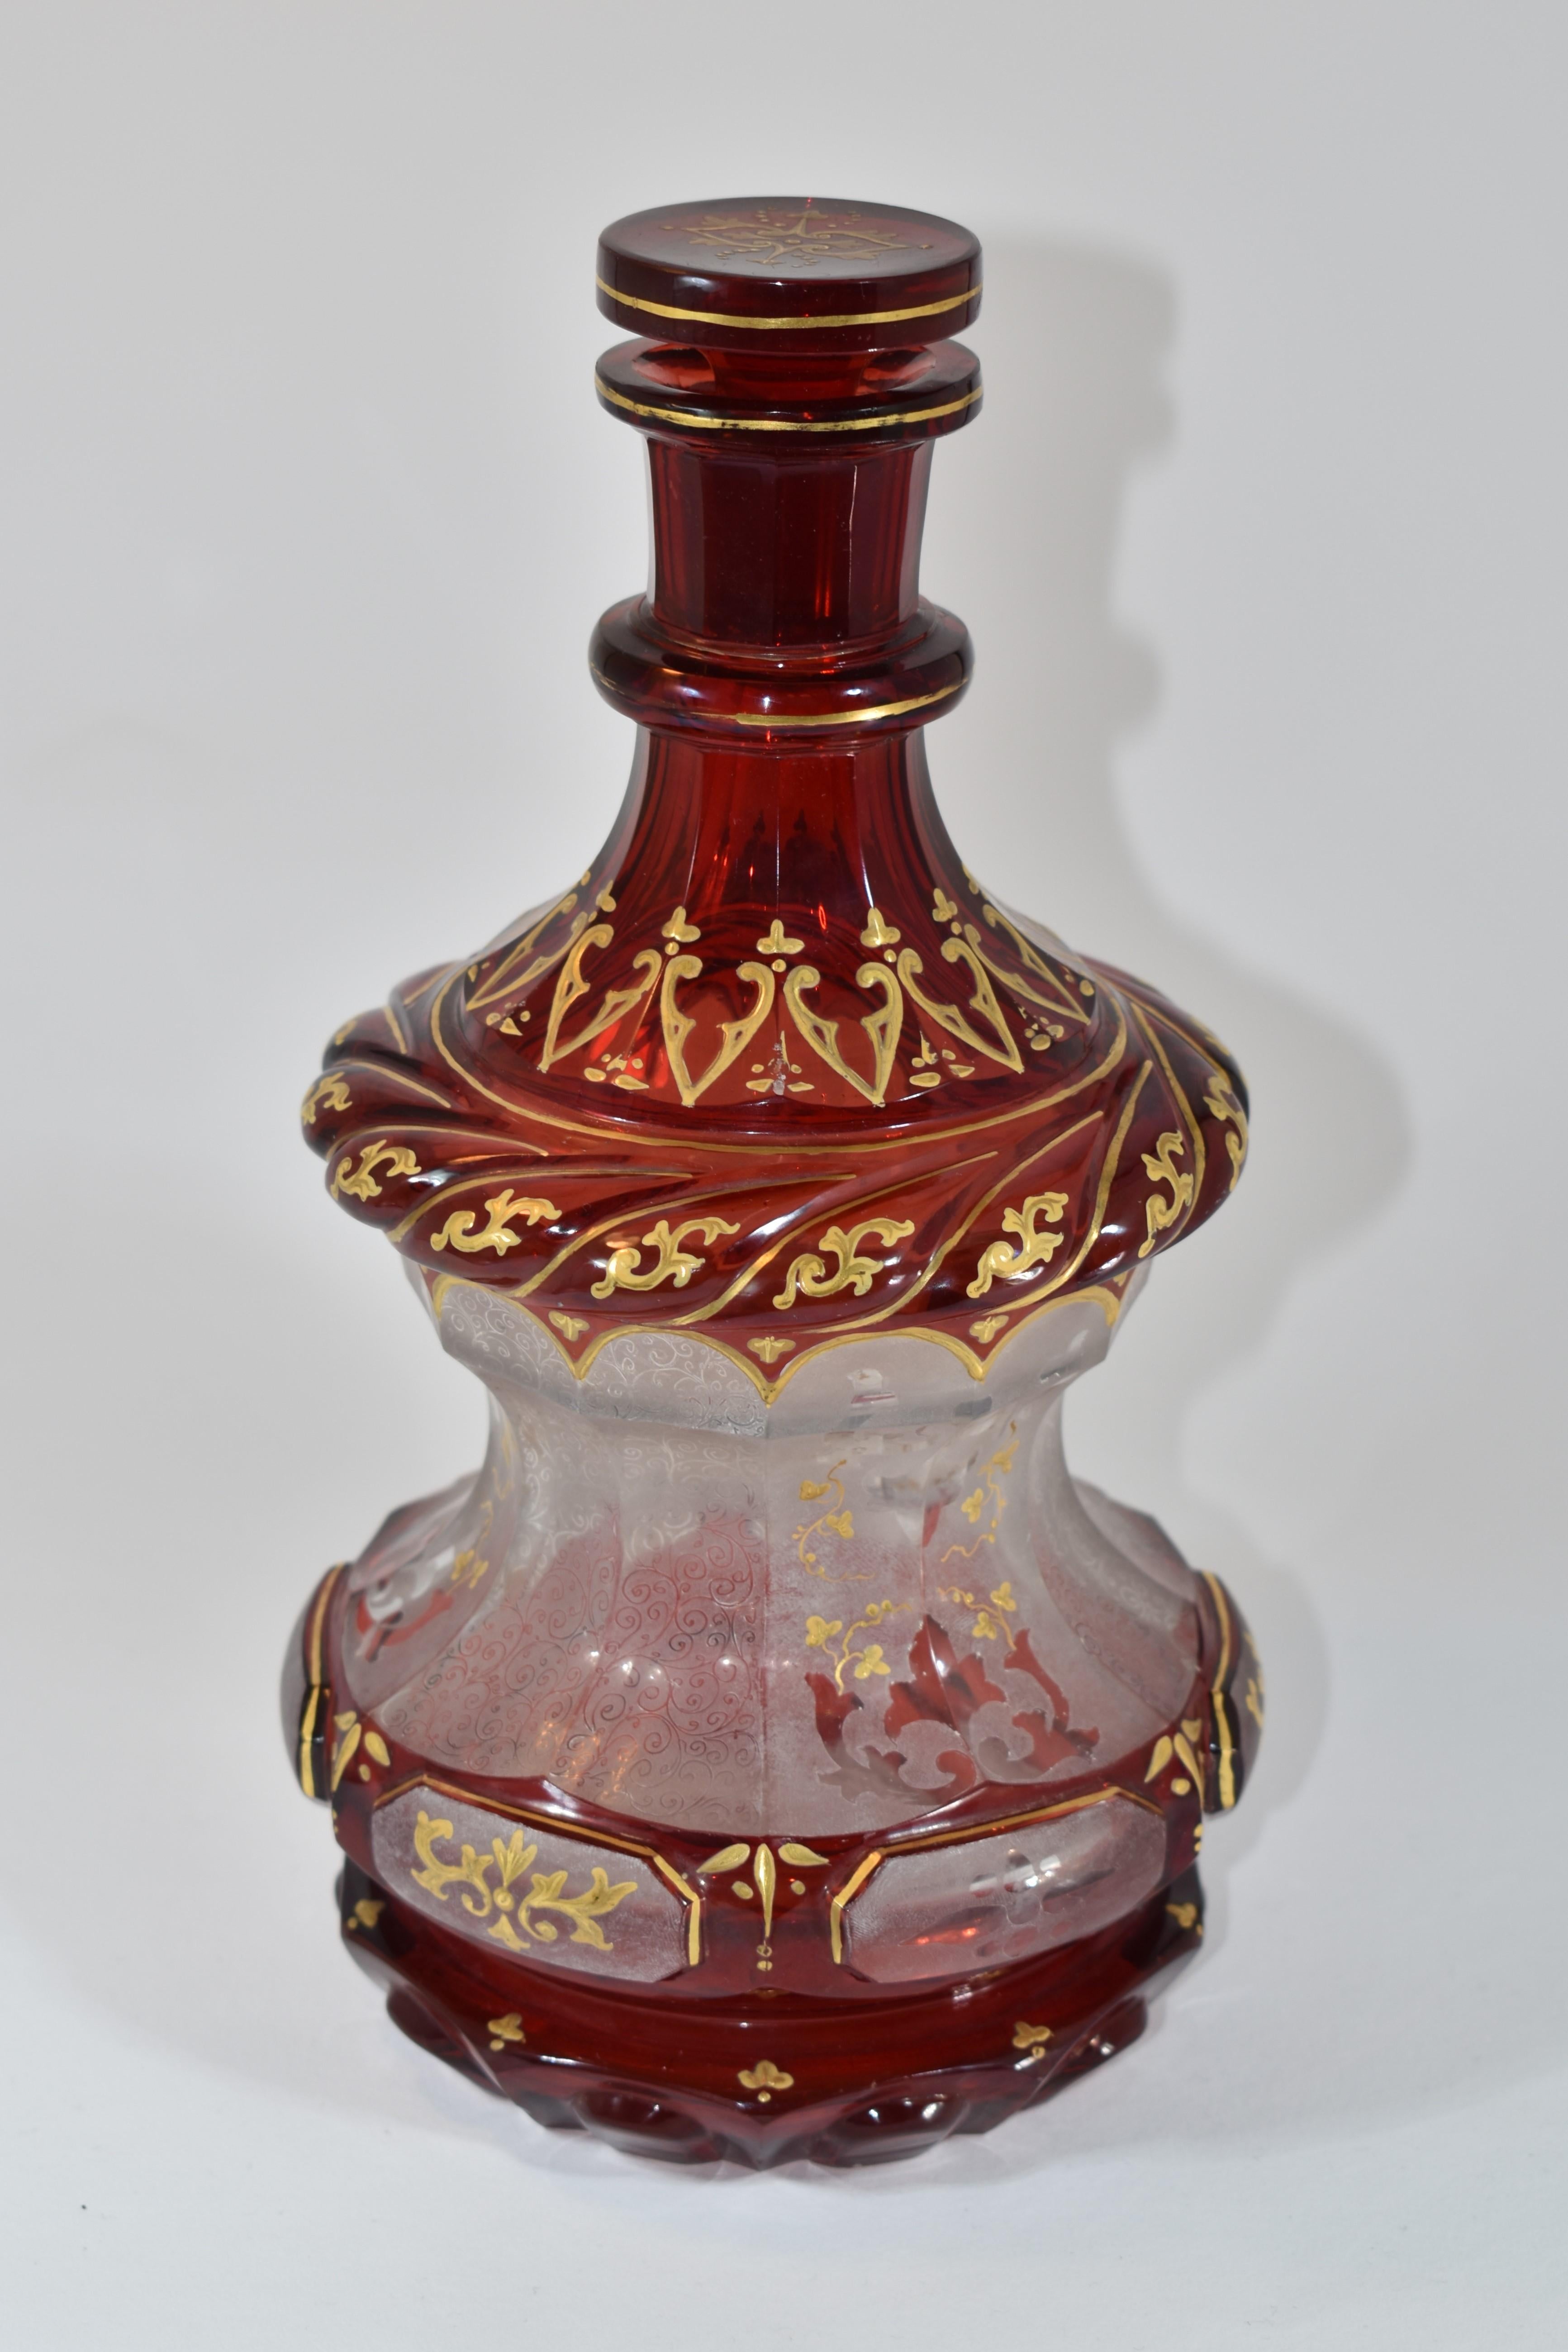 Bohemian glass, deep ruby cut glass bottle and stopper

Decorated with impressive gilded enamel and fine painting decoration featurnig scrollwork and geomertric patterns all over

An example of the high quality handcrafted glass of 19th century